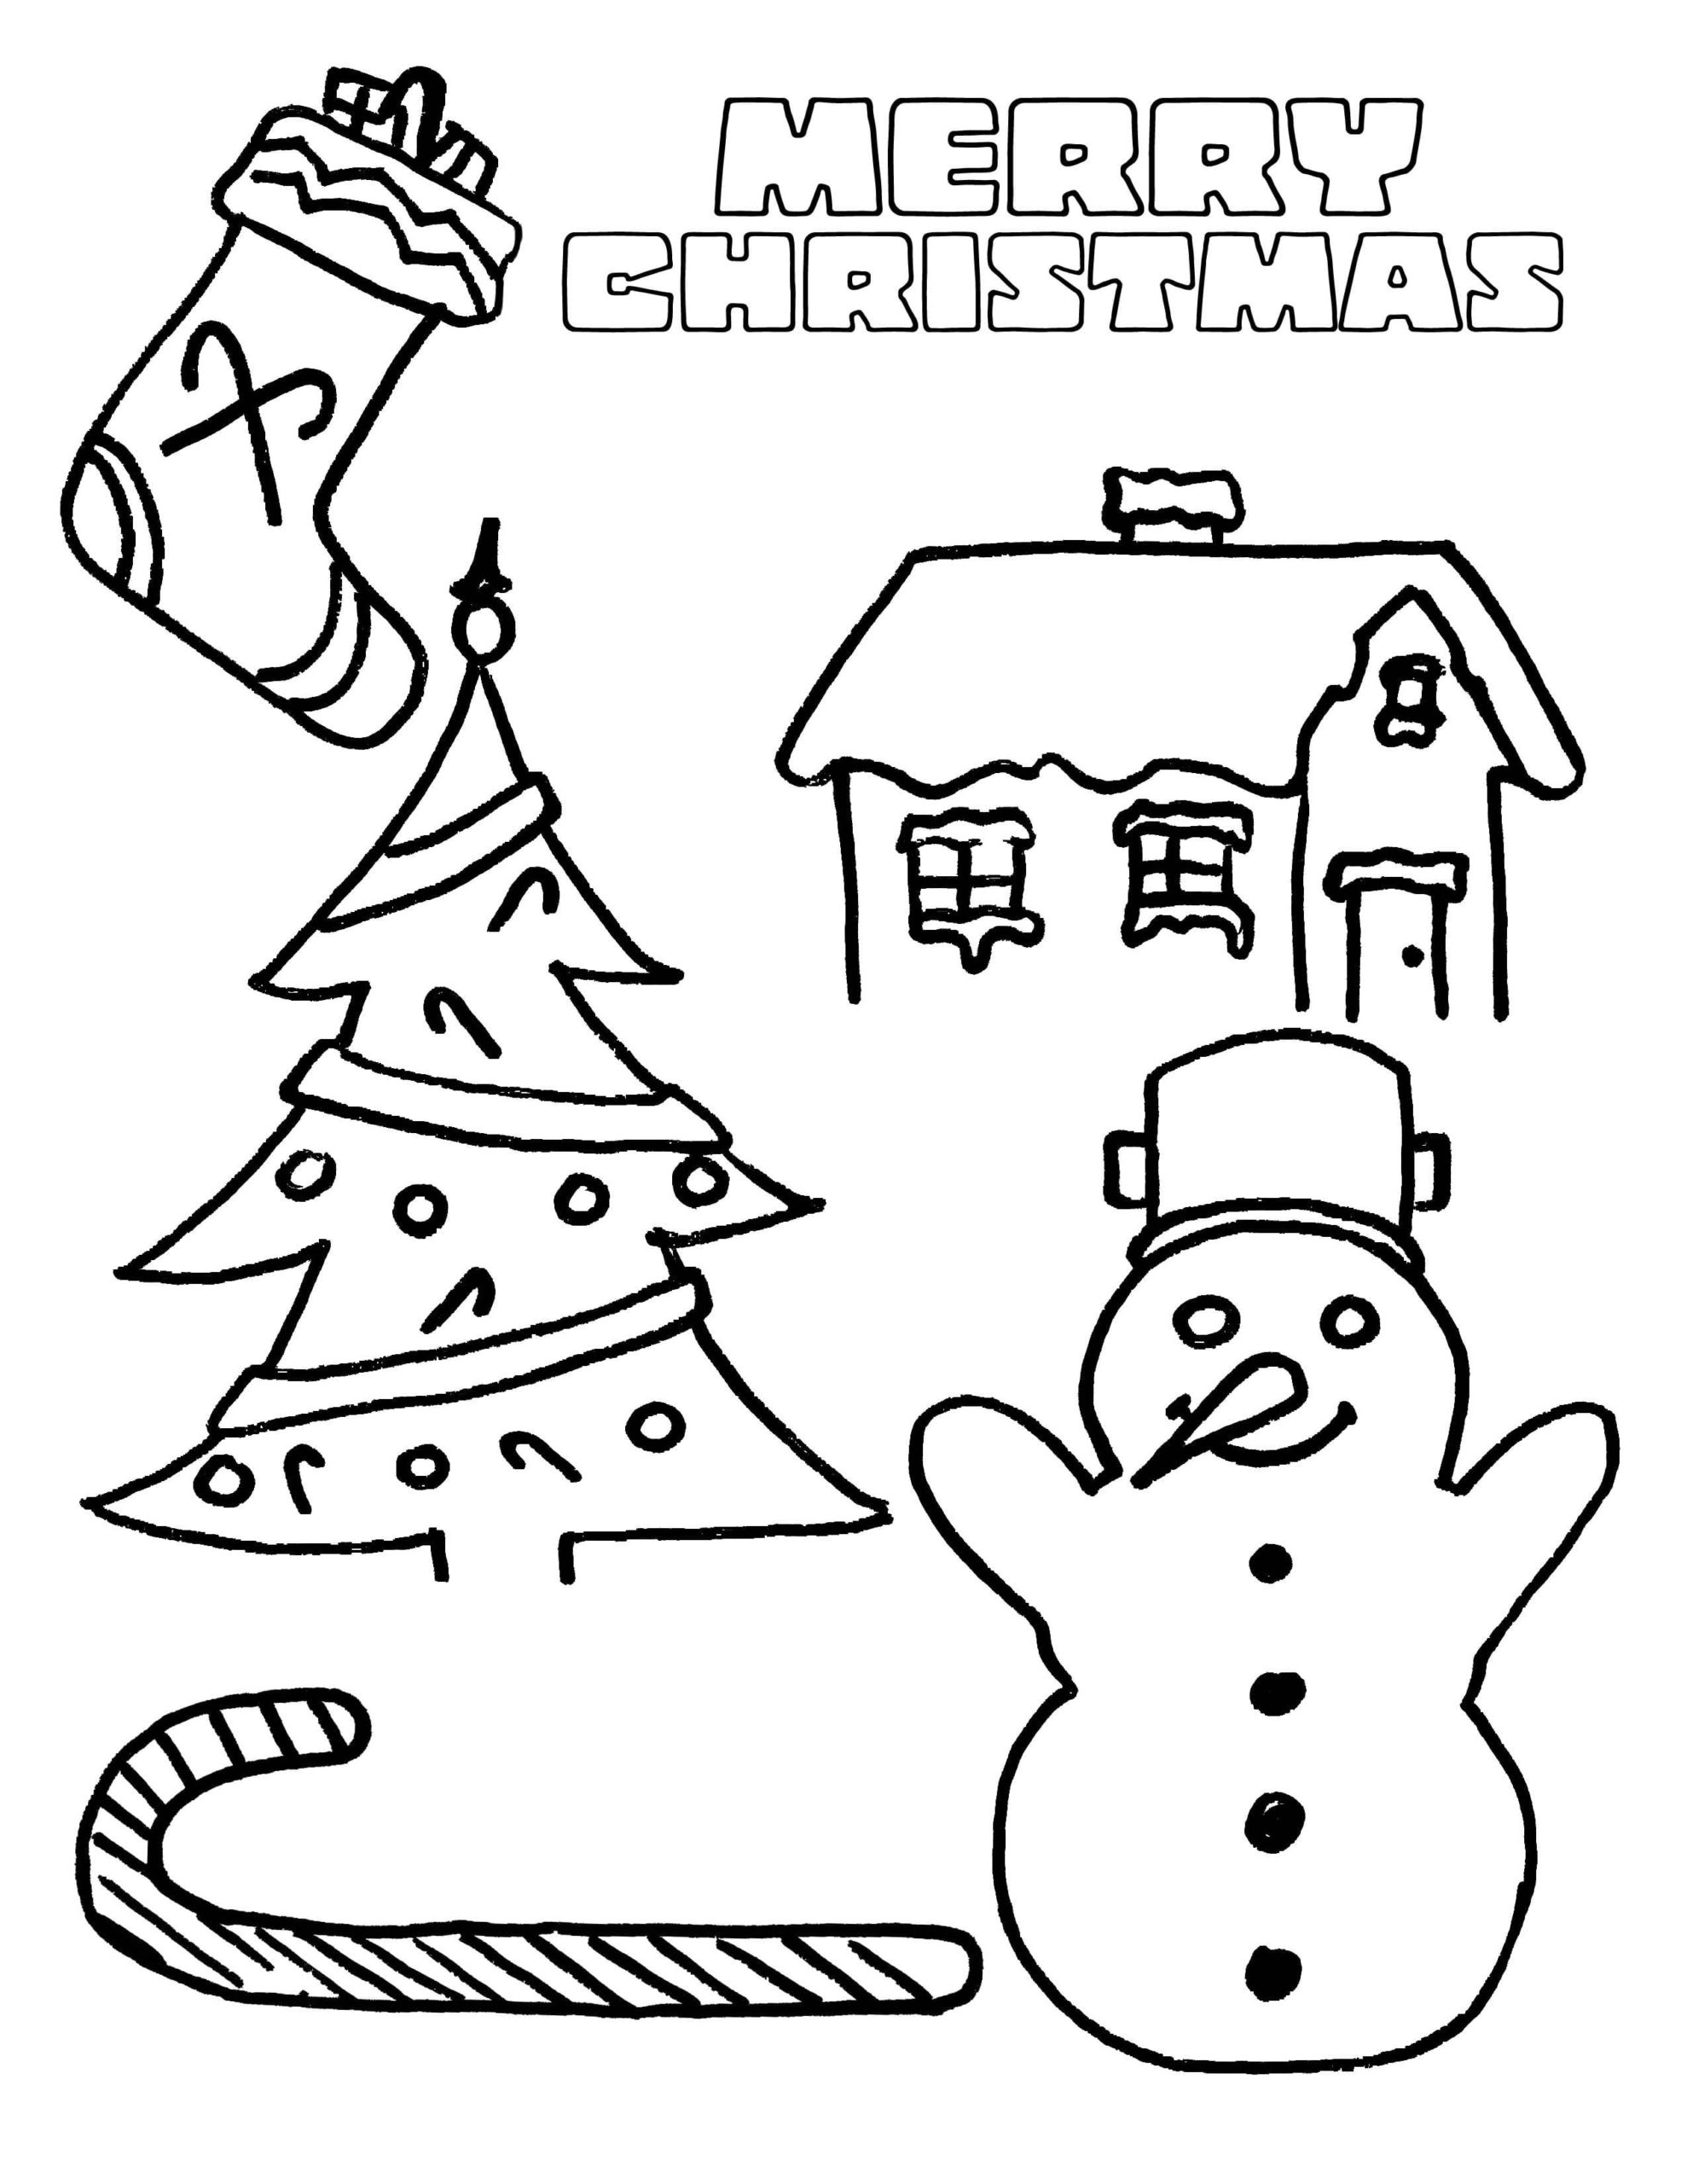 Main Attributes Of Christmas. Coloring Page